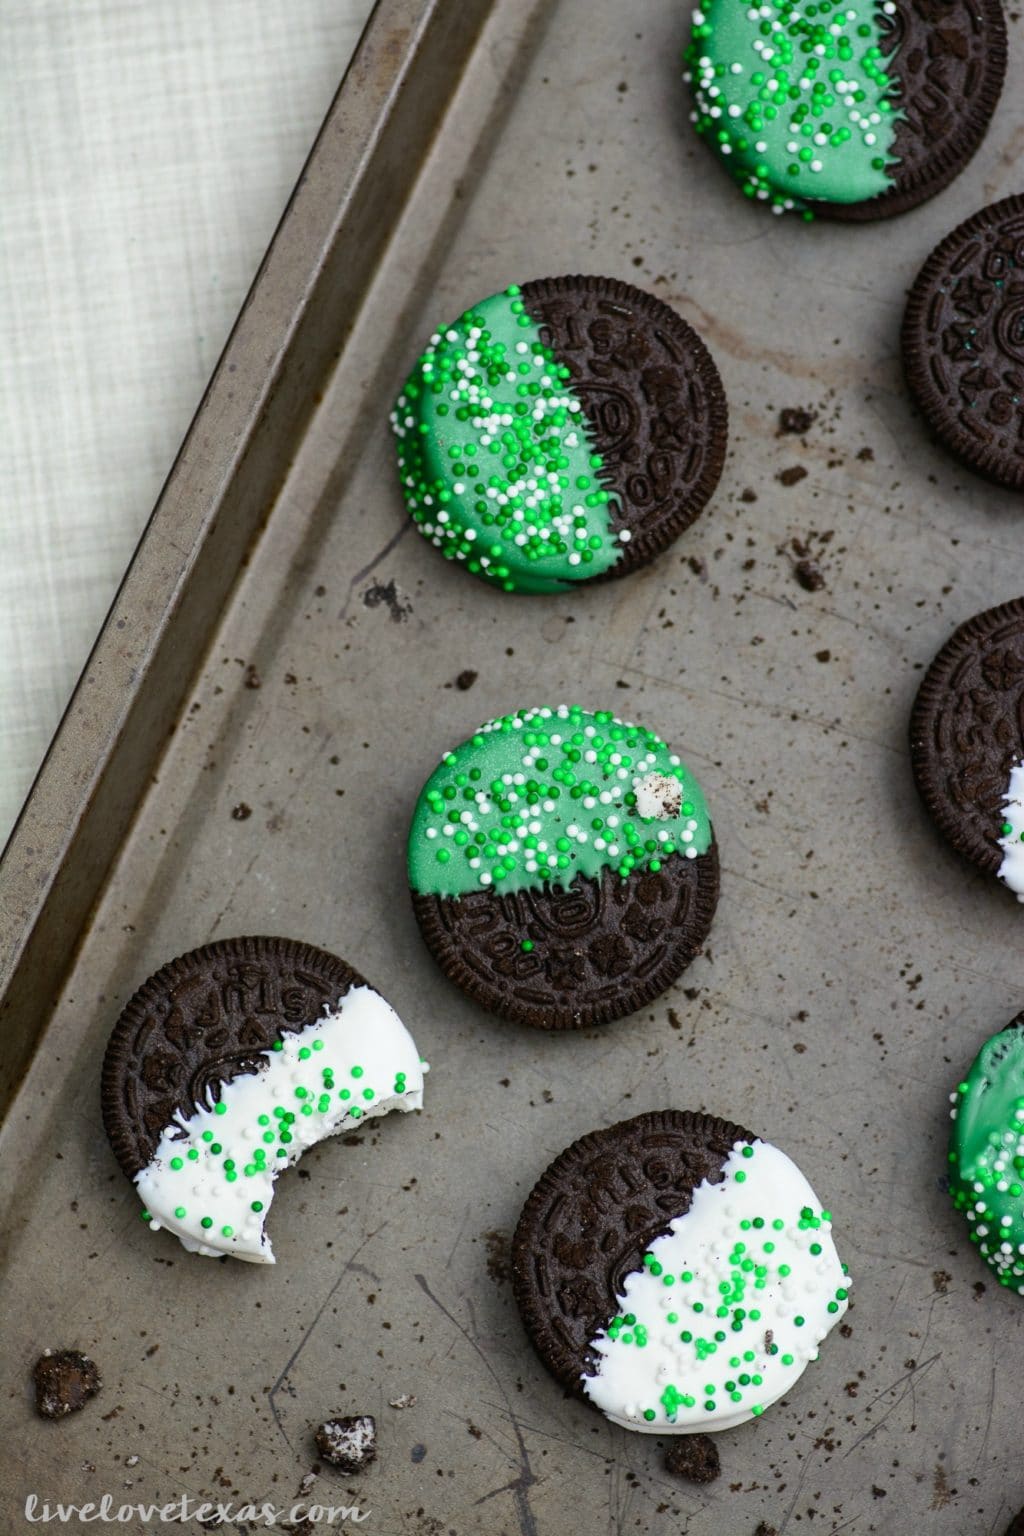 Looking for a last minute, yet easy St. Patrick's Day treat recipe? Check out these Chocolate Dipped Oreos for your party or a festive after school snack! #stpatricksday #stpatricksdayrecipes #stpatricksdaydesserts #stpatricksdayforkids #stpatricksdaycookies #easyrecipes #easydesserts #dessertsforkids